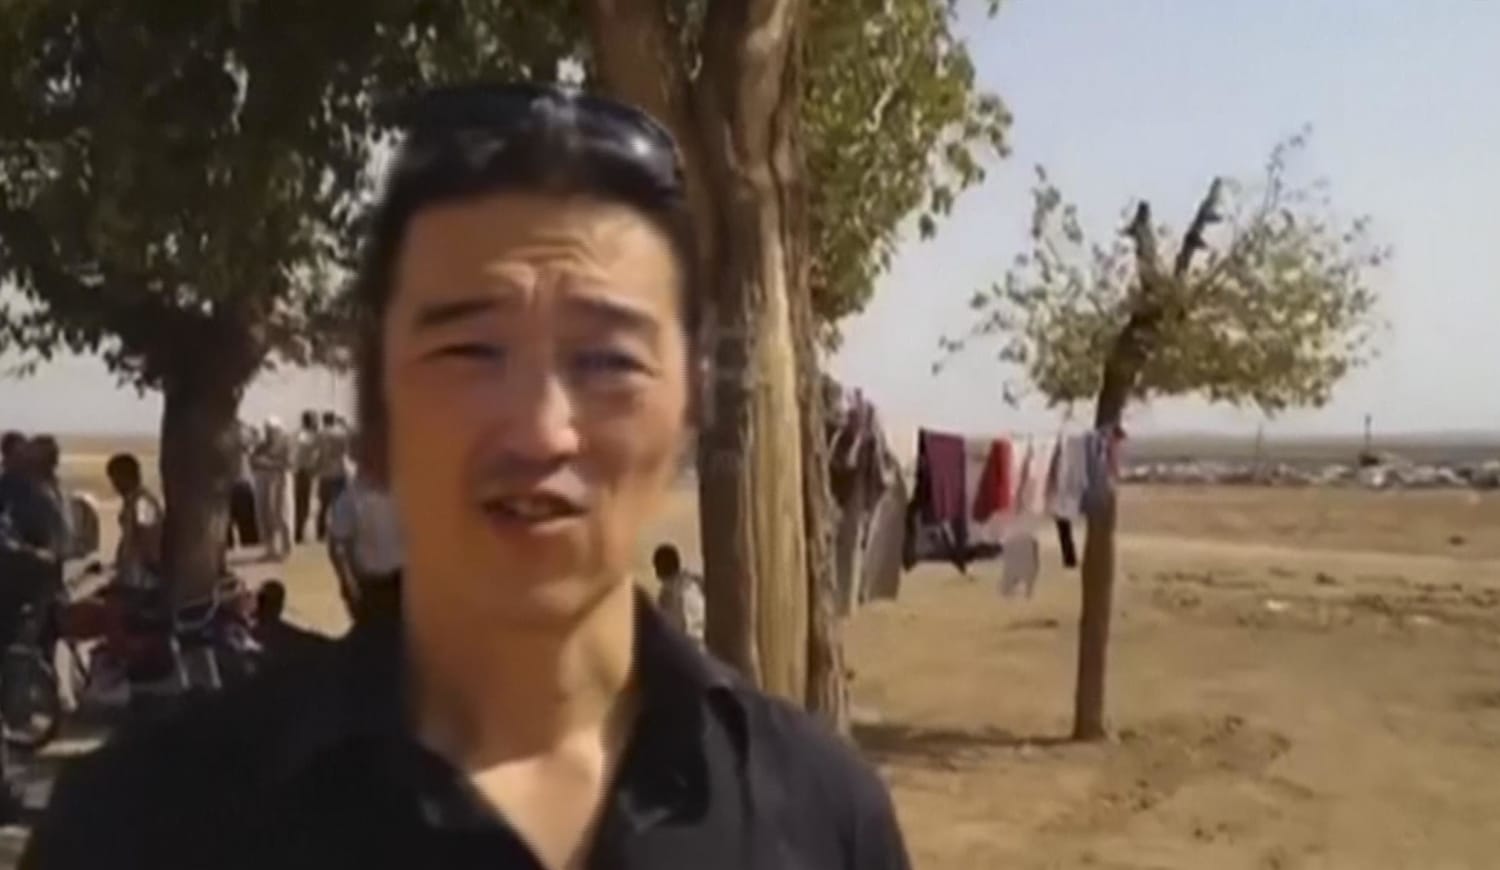 ISIS Releases Video Purportedly Showing Beheading of Japanese.